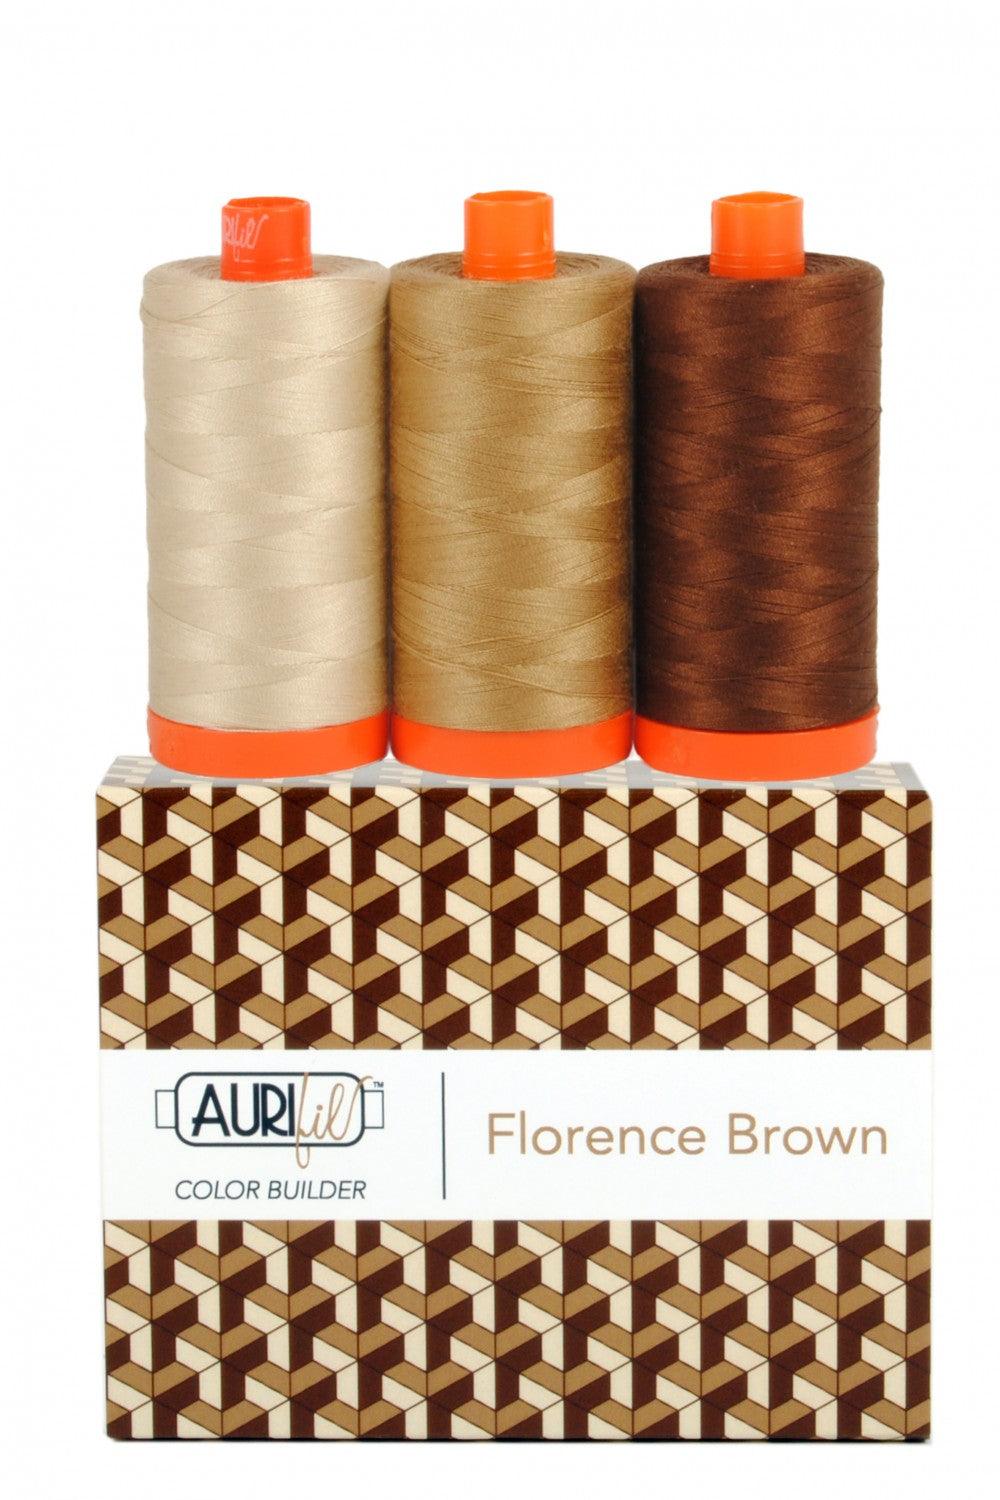 Florence Brown, Color Builder, Aurifil, 1300m, Package of 3 - Kawartha Quilting and Sewing LTD.